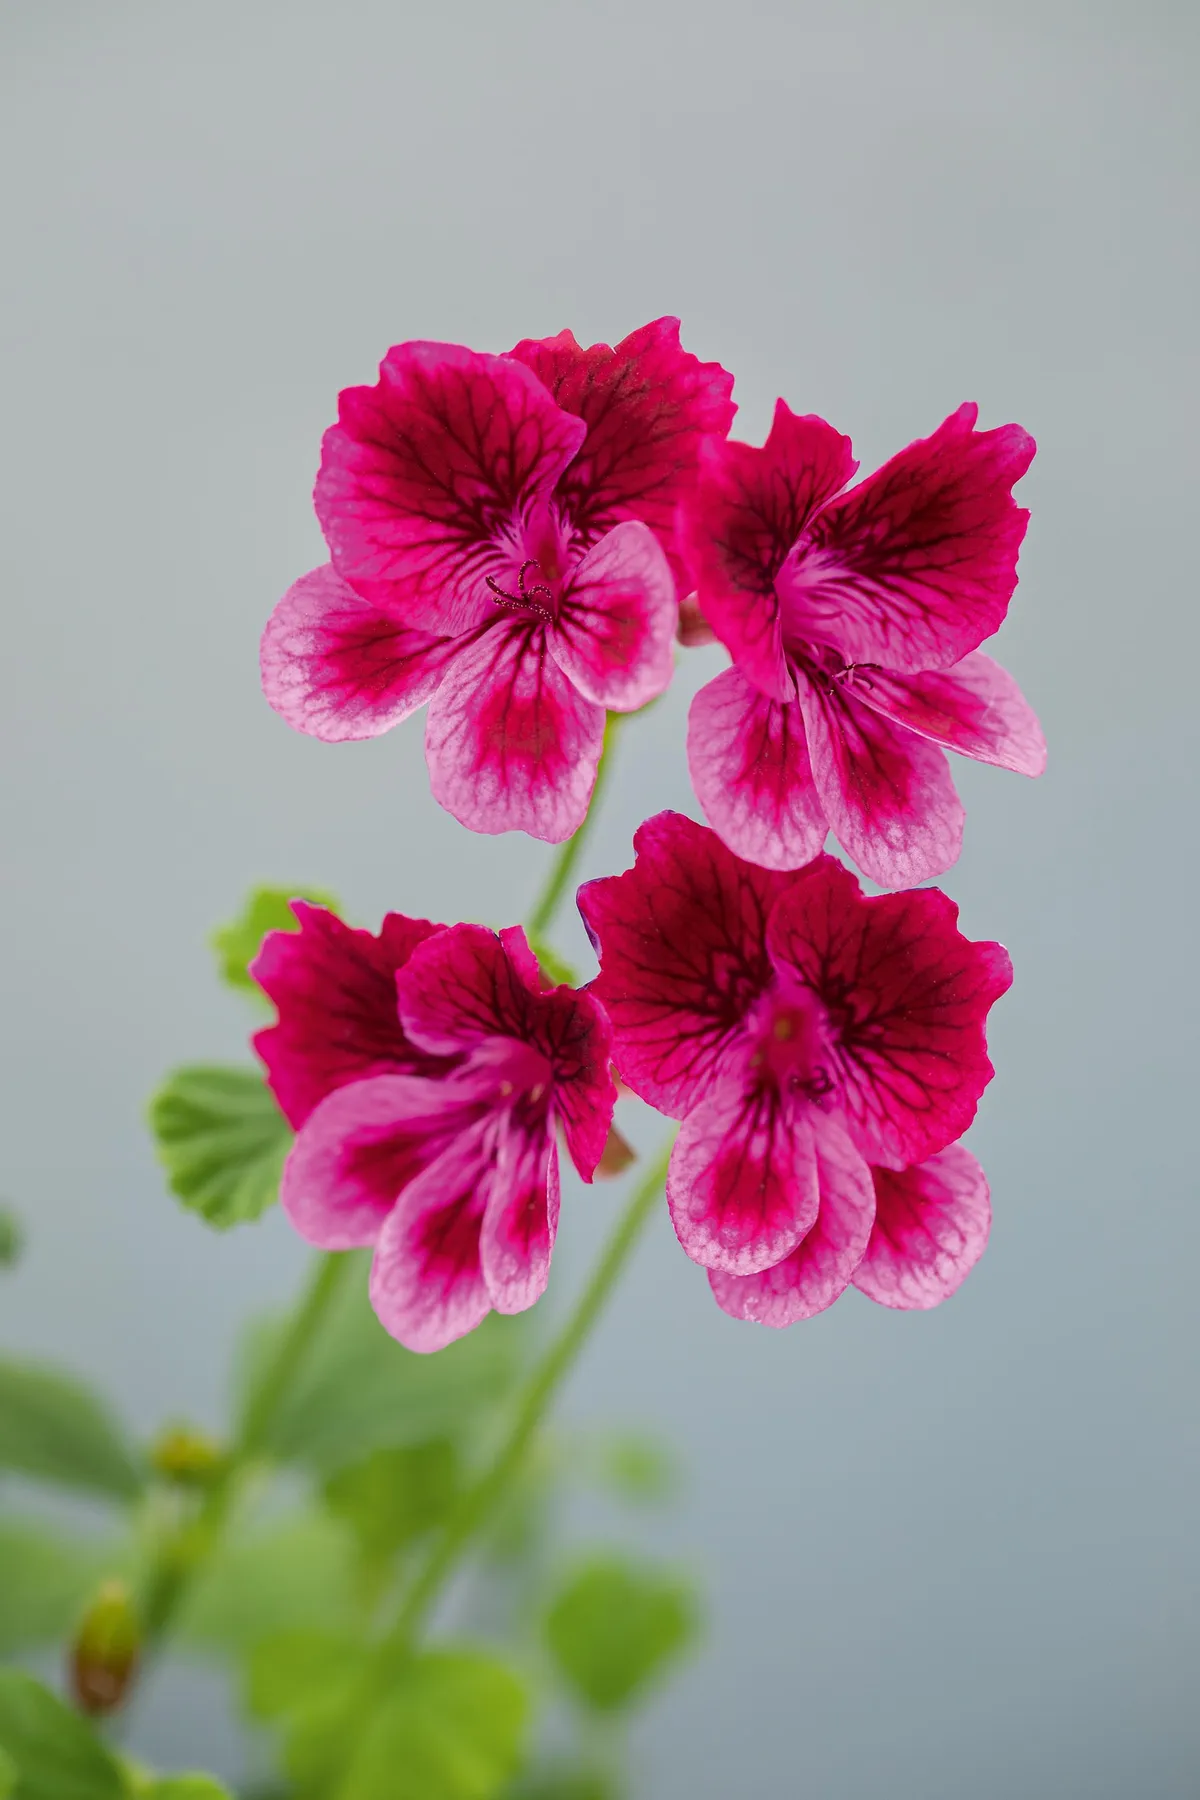 Pelargonium ‘Cottenham Wonder’. A strong grower with an upright habit, producing a profusion of rose-pink flowers, with overlaid dark-red upper petals that have a red blotch and similar red feathering on the lower petals. Excellent as a cut flower. 40cm. AGM*. RHS H1C, USDA 9b-13.